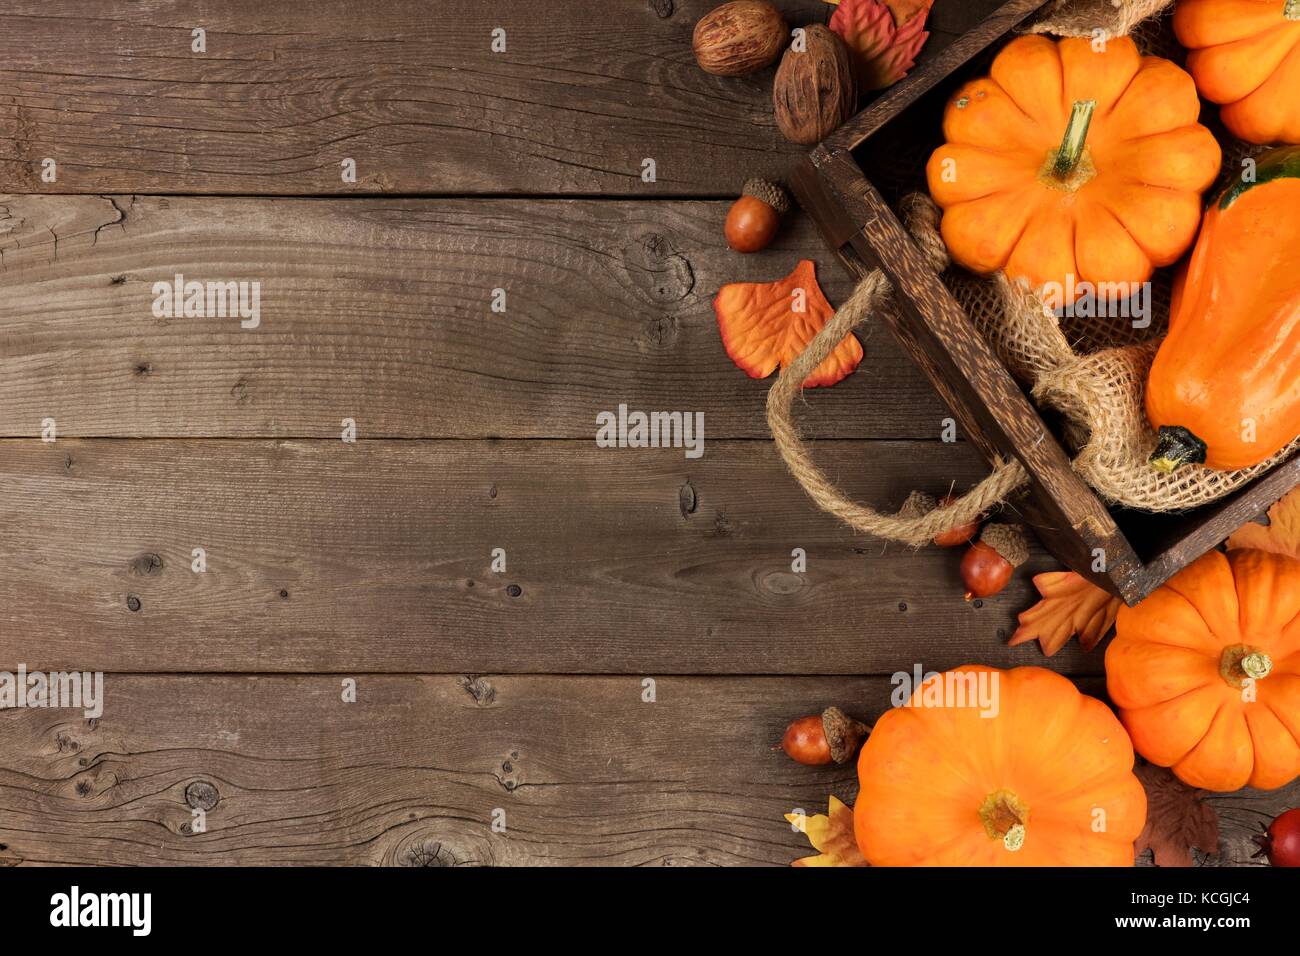 Autumn side arrangement of leaves and a crate of pumpkins over a rustic wood background Stock Photo